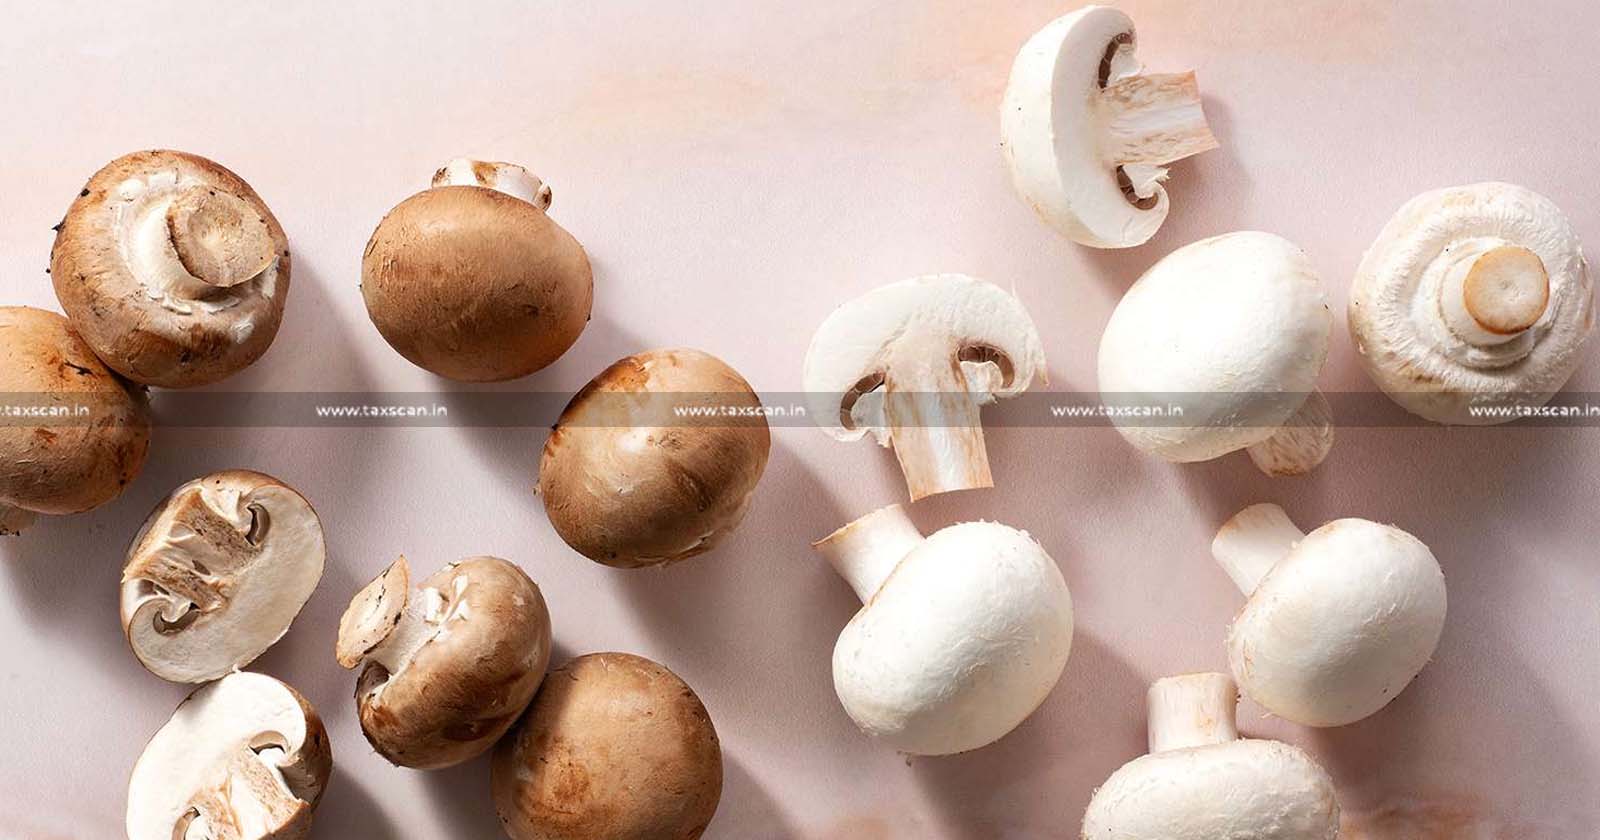 Income Generated from Production - Income Generated - Production - Sale of White Button Mushrooms - White Button Mushrooms - Agricultural Activity - Tax - ITAT - Taxscan